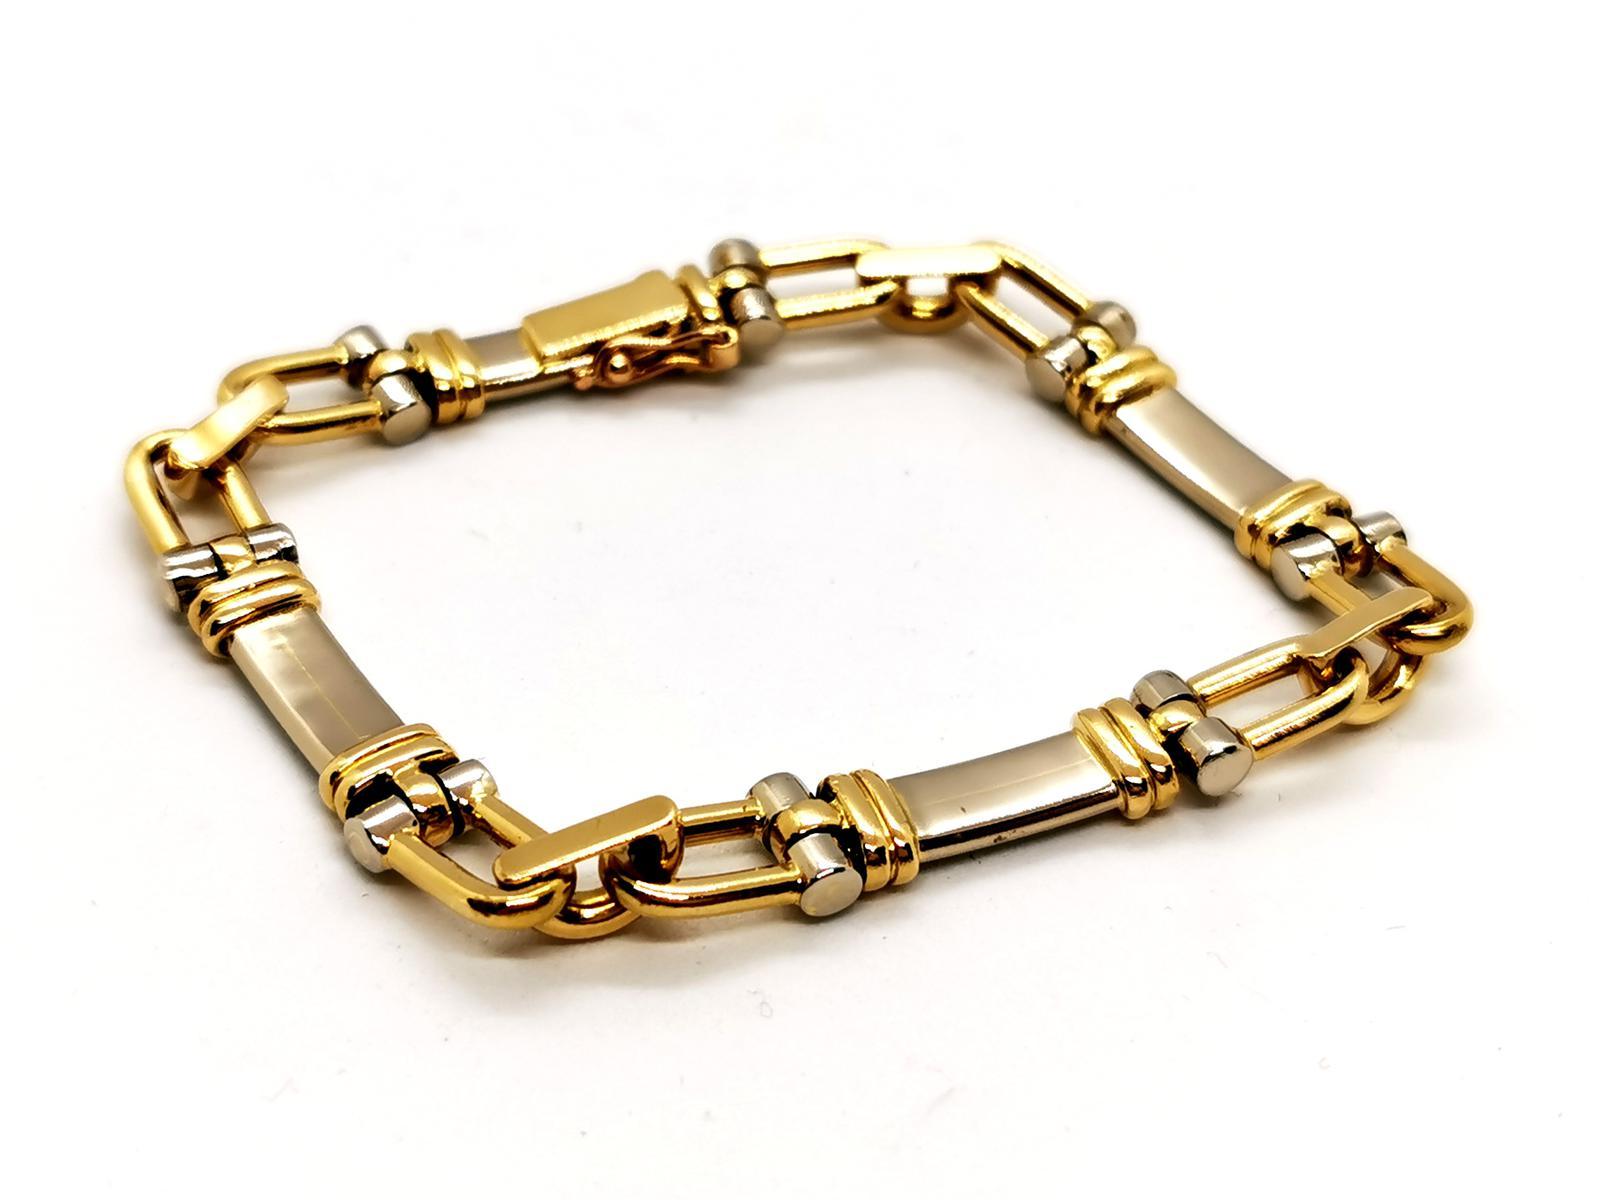 Chain bracelet caliper. yellow gold and white gold 750 mils (18 carats). length: 19cm. width: 0.79 cm. thickness: 0.60 cm. with eight safety clasp. total weight: 25.64 g. punched owl. excellent condition.
